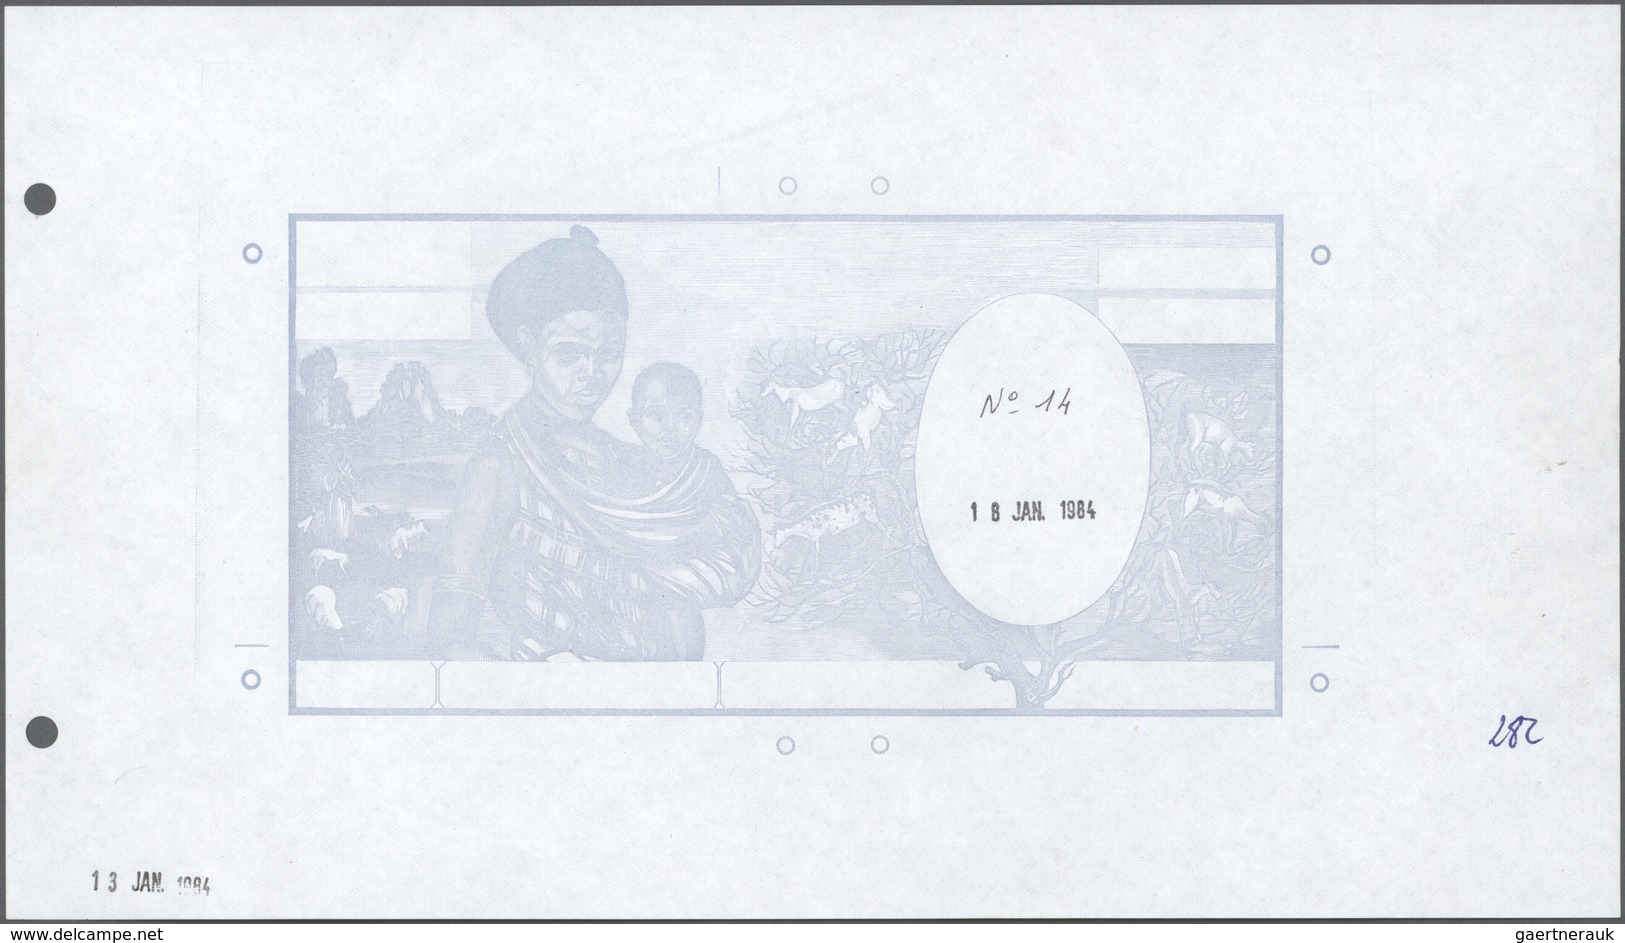 Djibouti / Dschibuti: Highly Rare Archival Proof Print Of The Banque De France For The 10.000 Francs - Djibouti